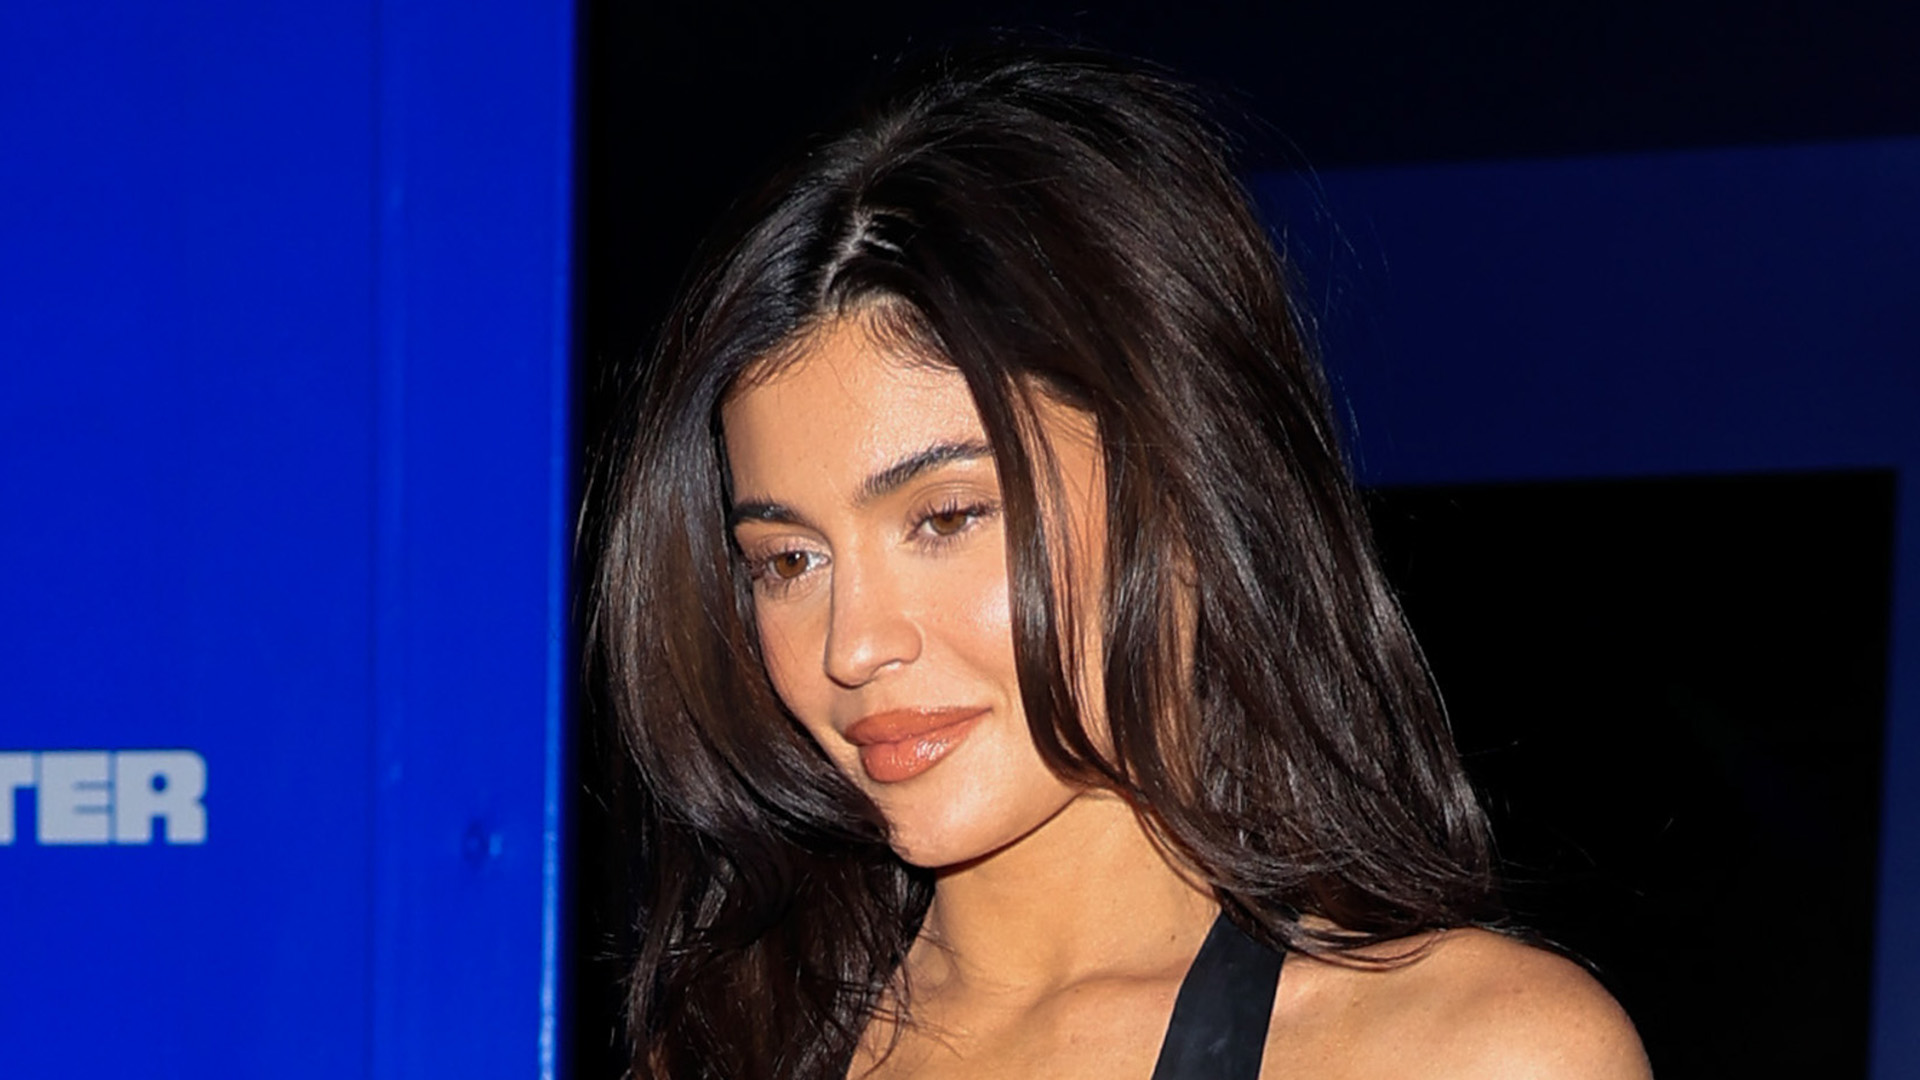 Kylie Jenner is ‘struggling to stay relevant,’ fans claim after the star launches multiple businesses in a few months [Video]